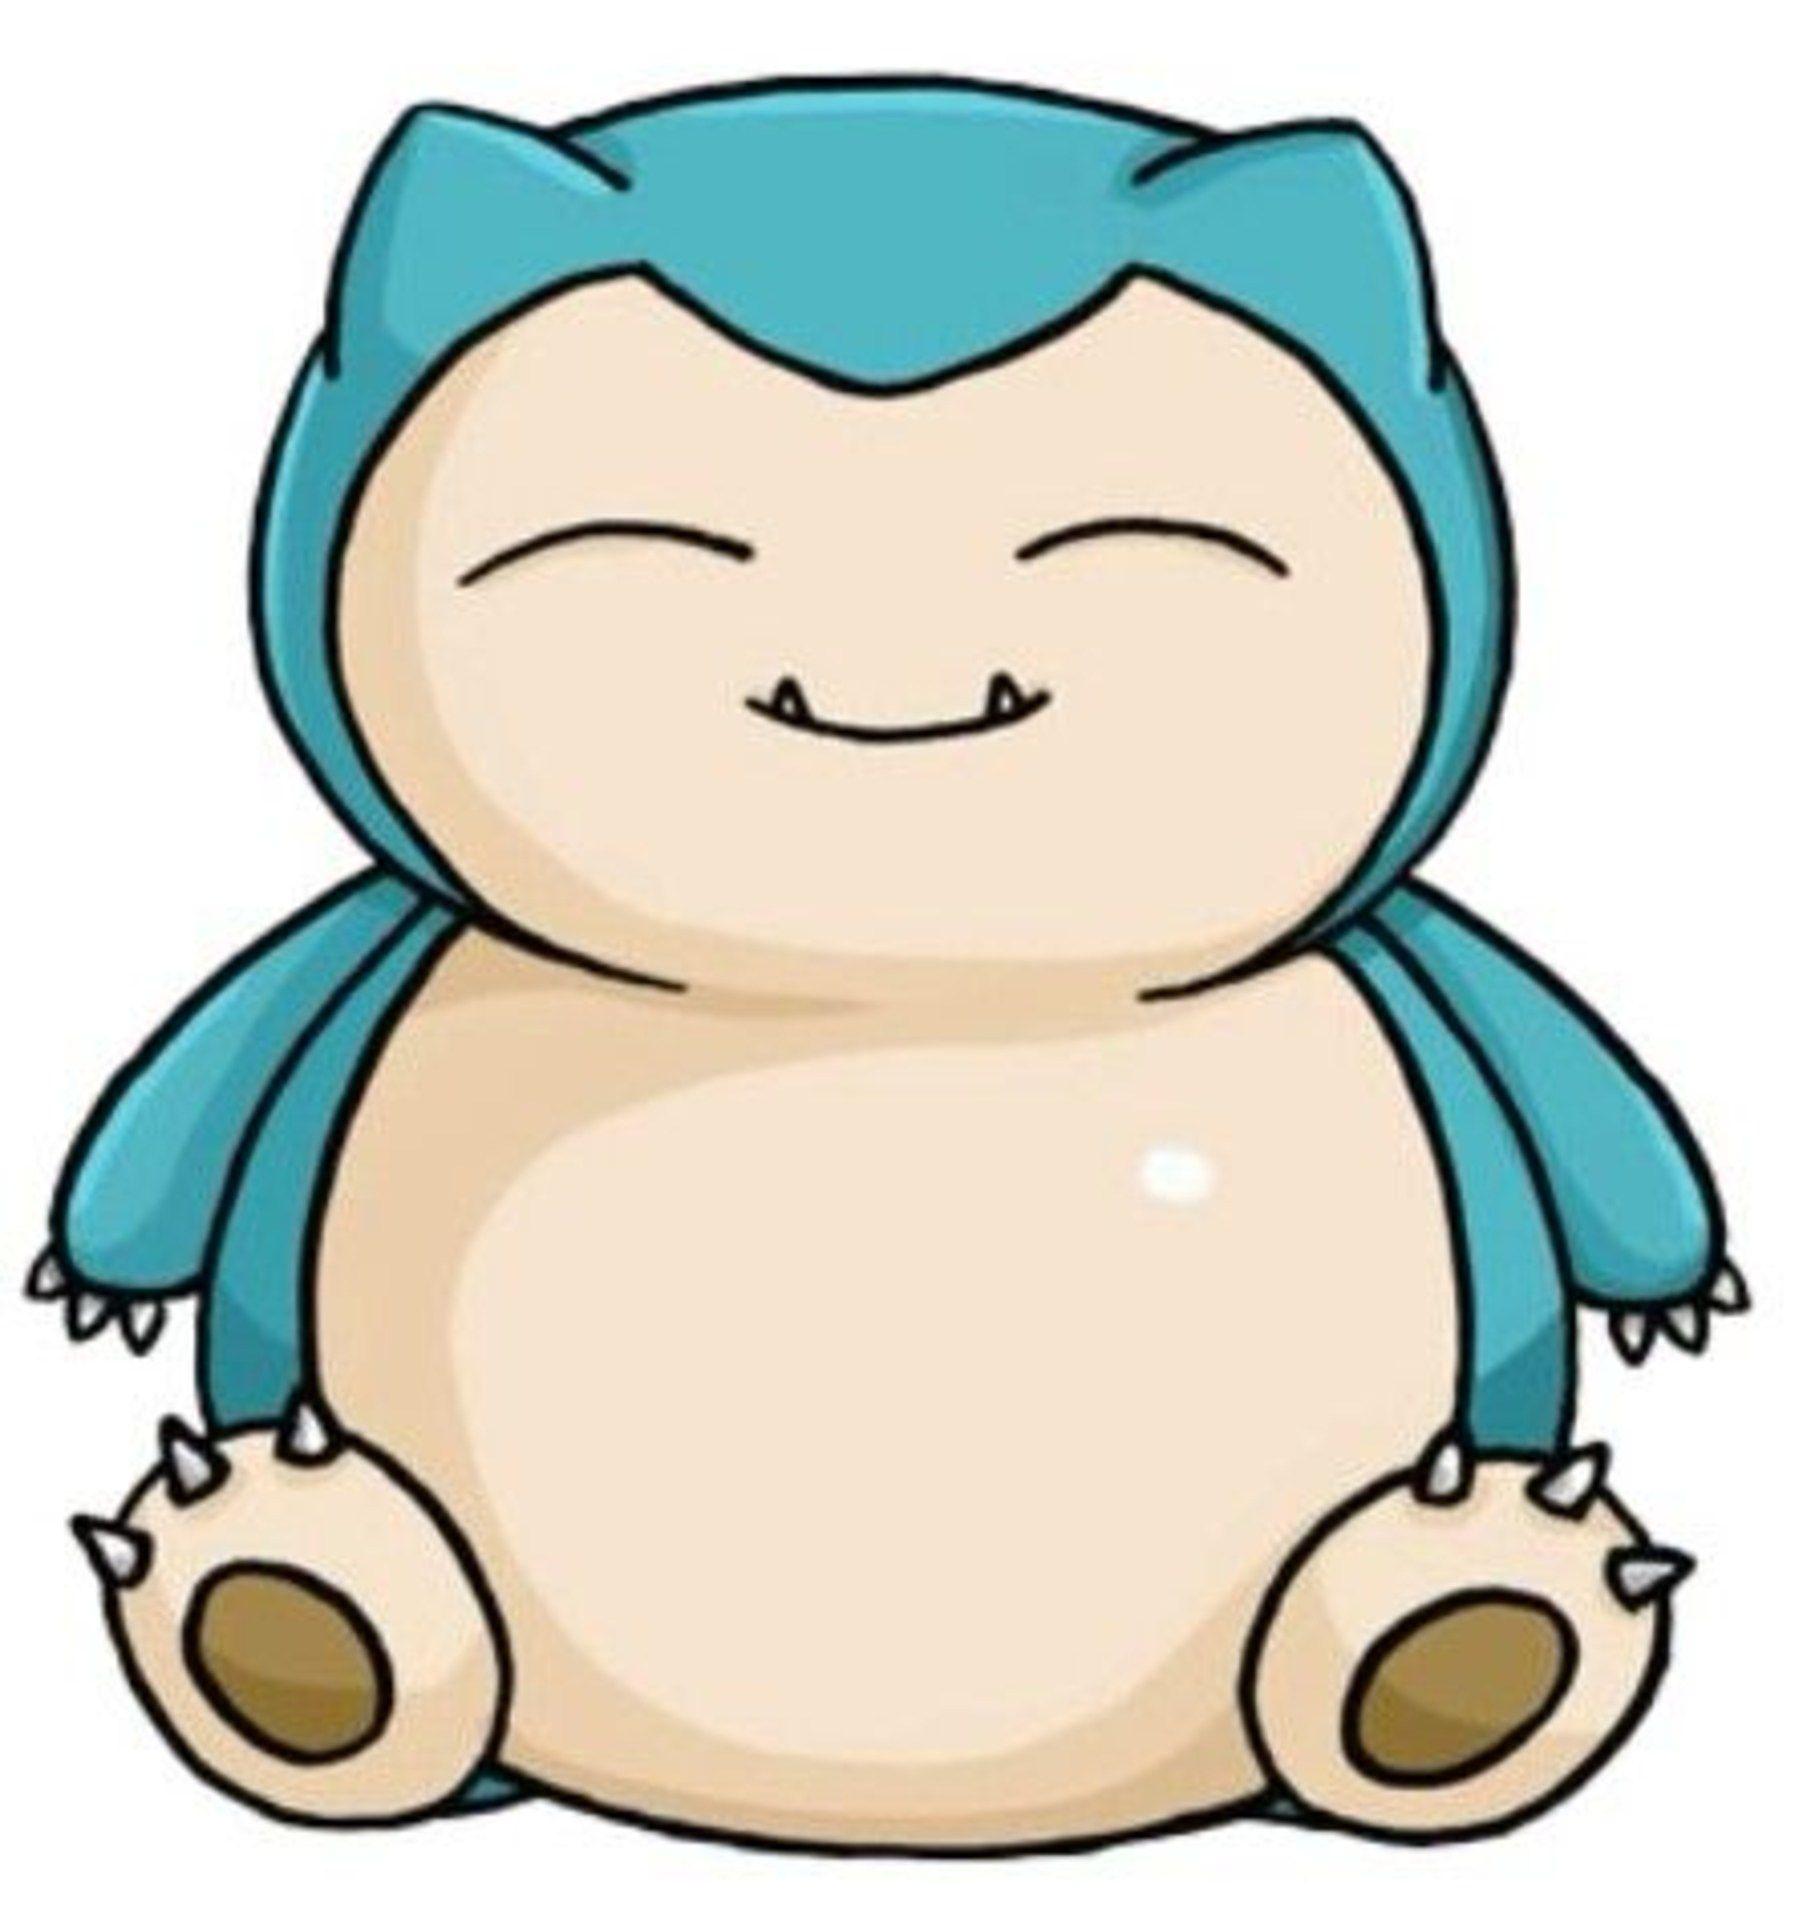 Cute Snorlax Wallpapers Top Free Cute Snorlax Backgrounds